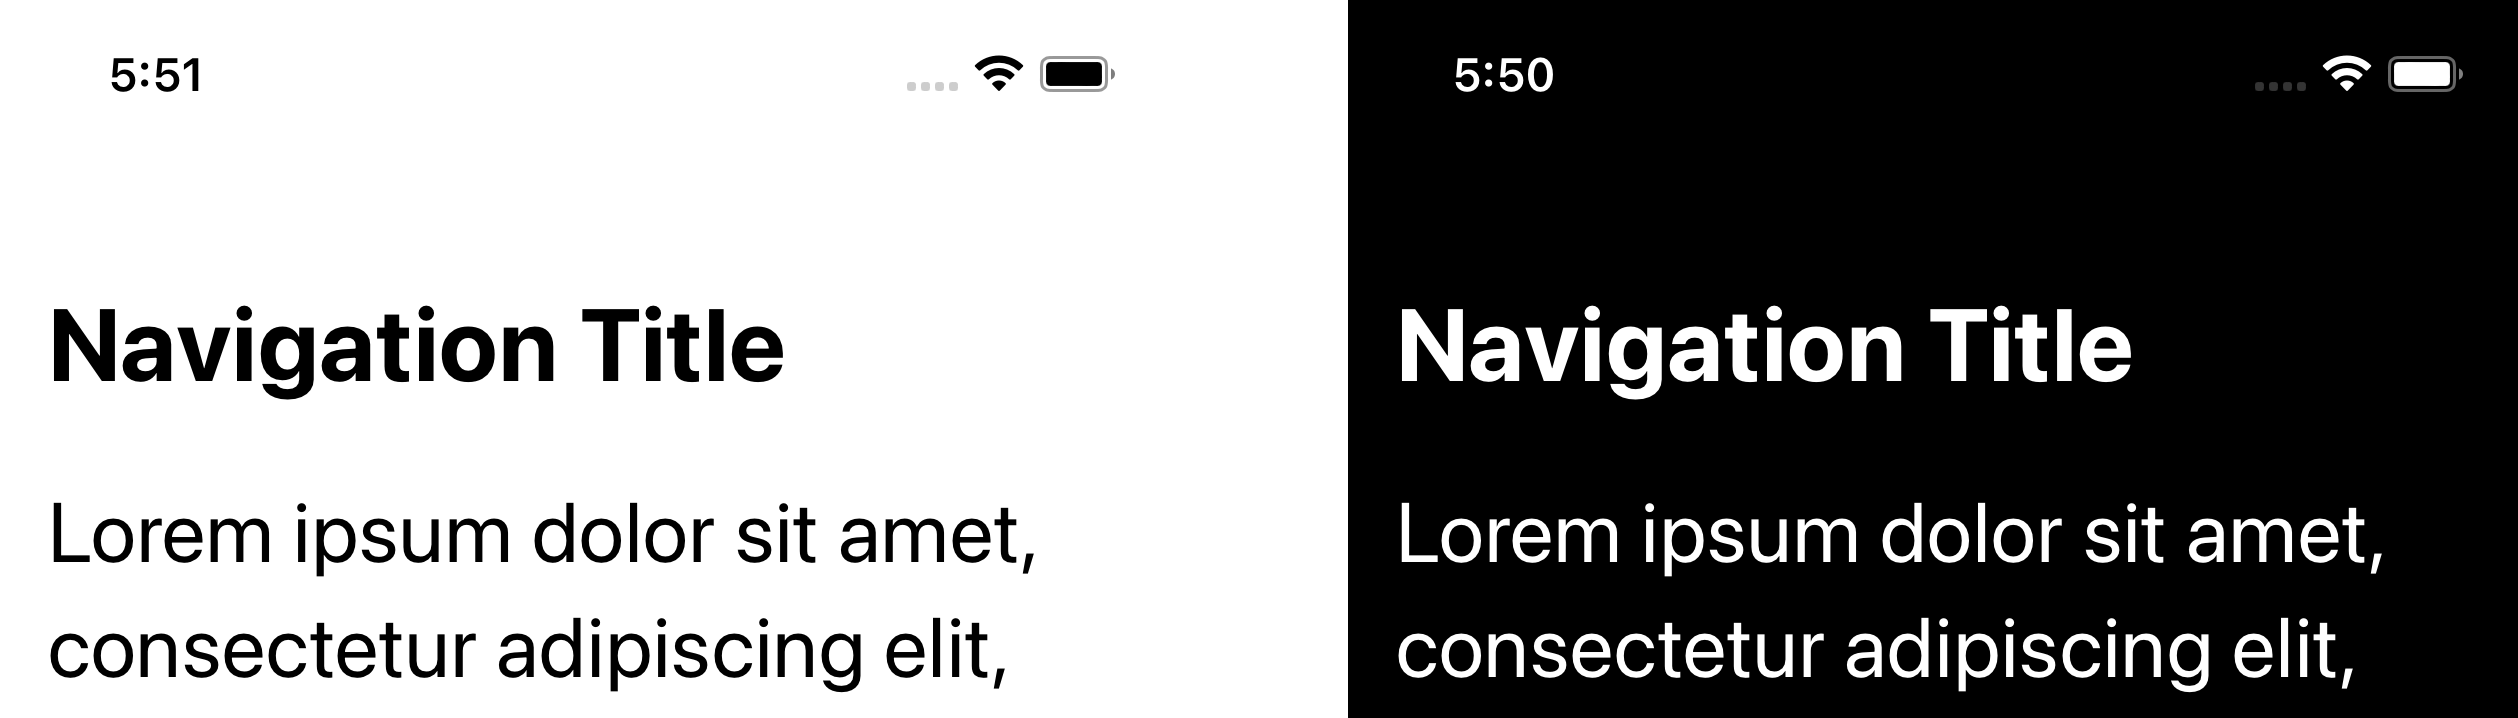 A status bar color can be white or black.